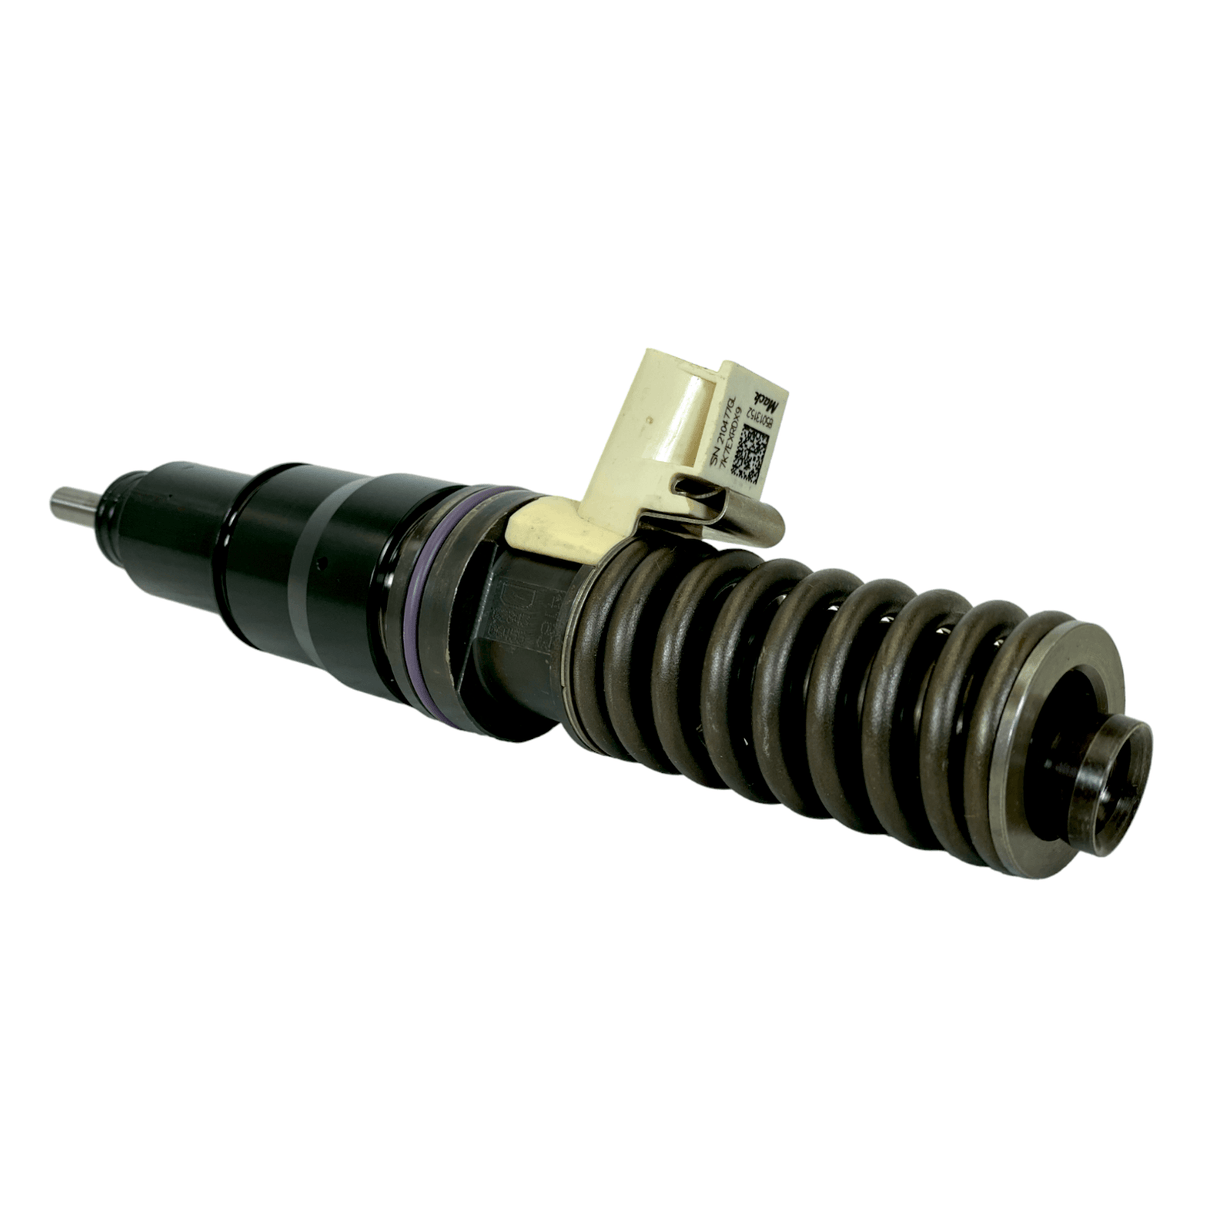 85003109 Genuine Volvo® Fuel Injector For D13.